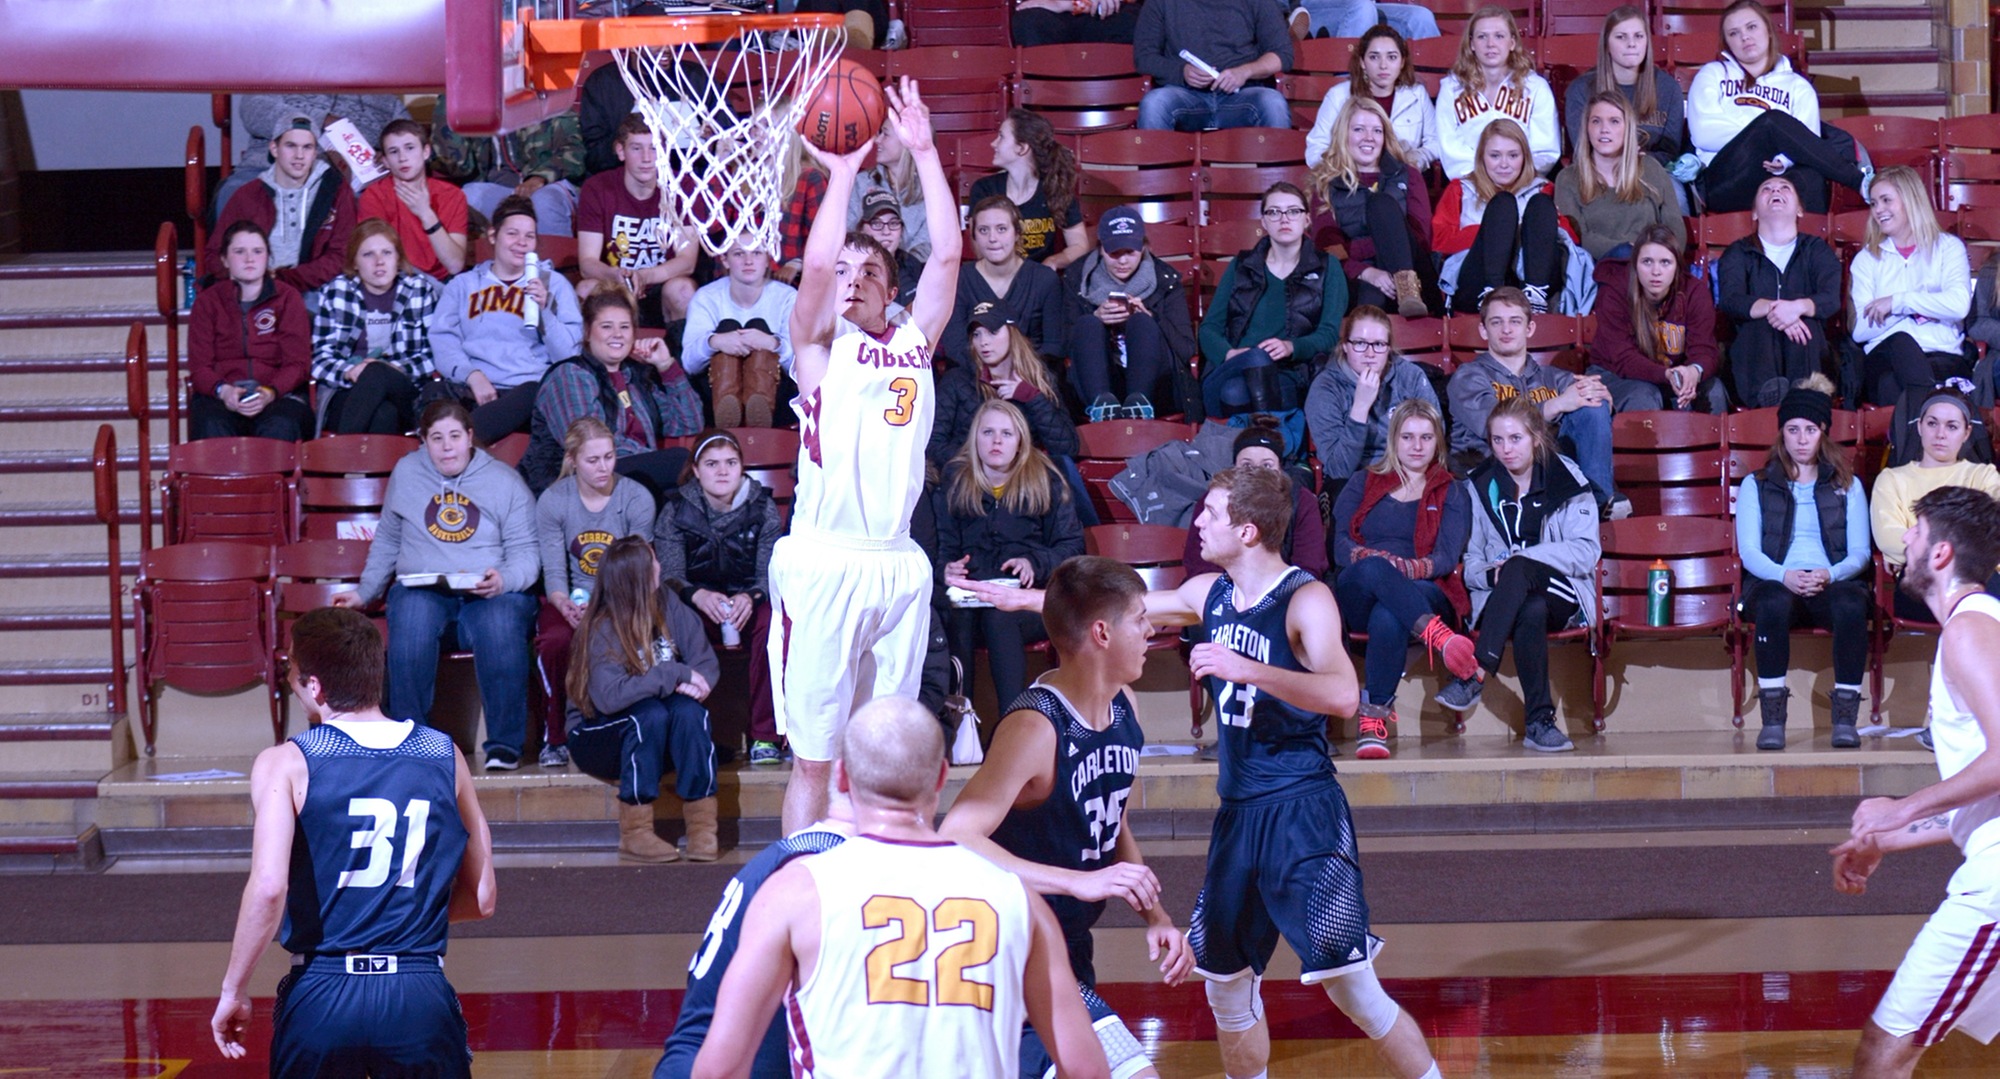 Senior Zach Kinny scored a team-high 12 points and grabbed five rebounds in the Cobbers' game at Carleton.